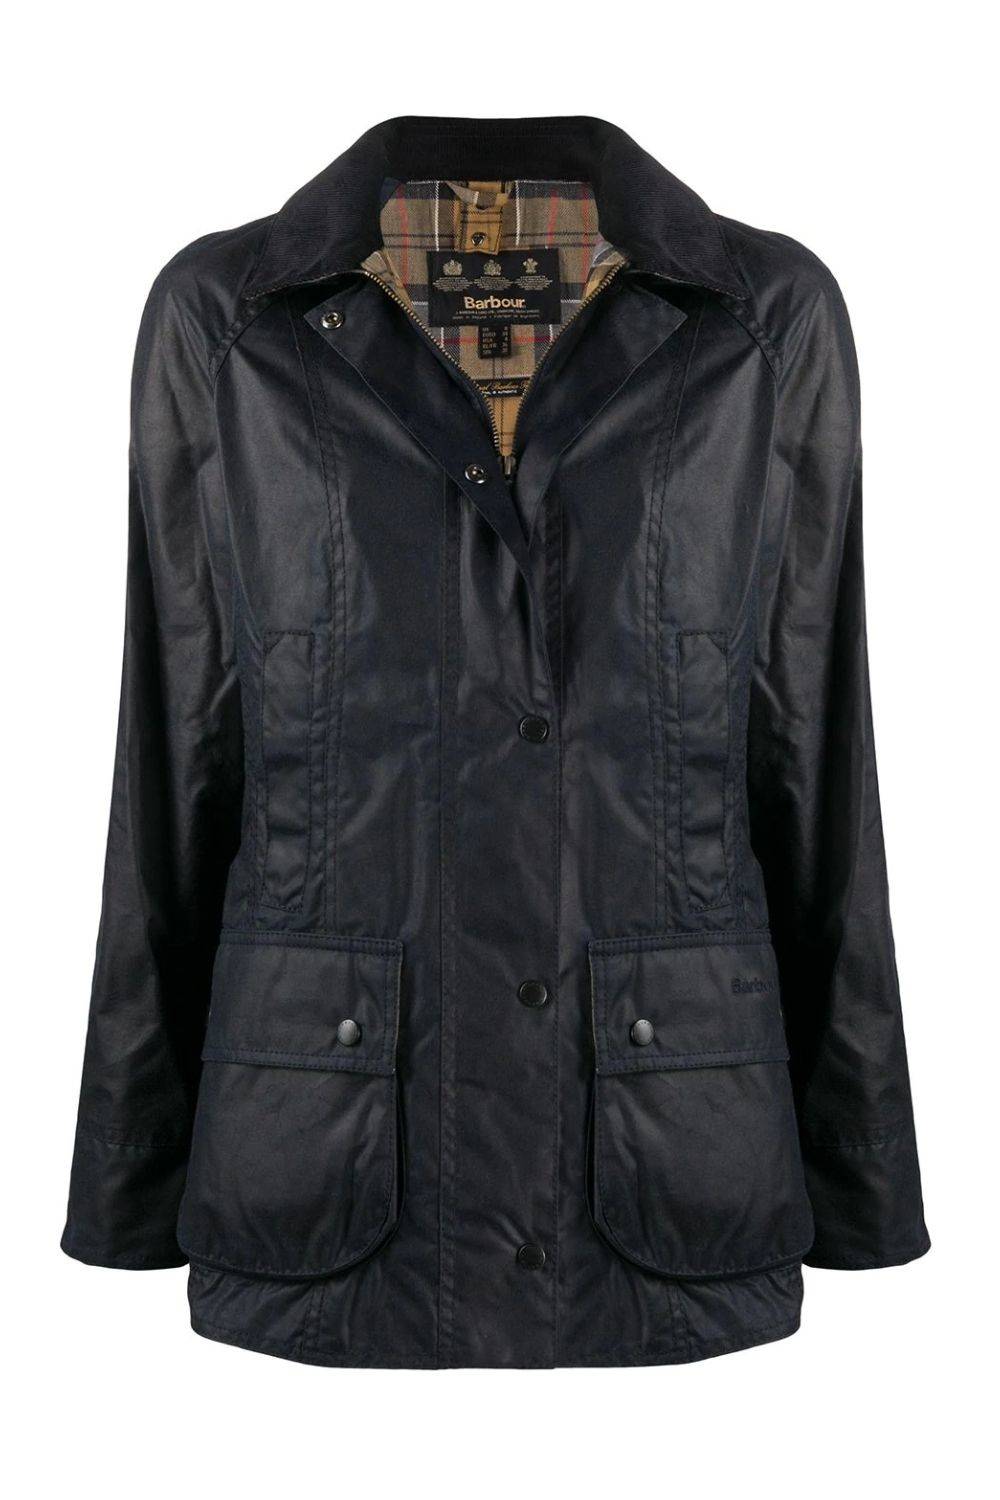 Barbour chaqueta Beadnell